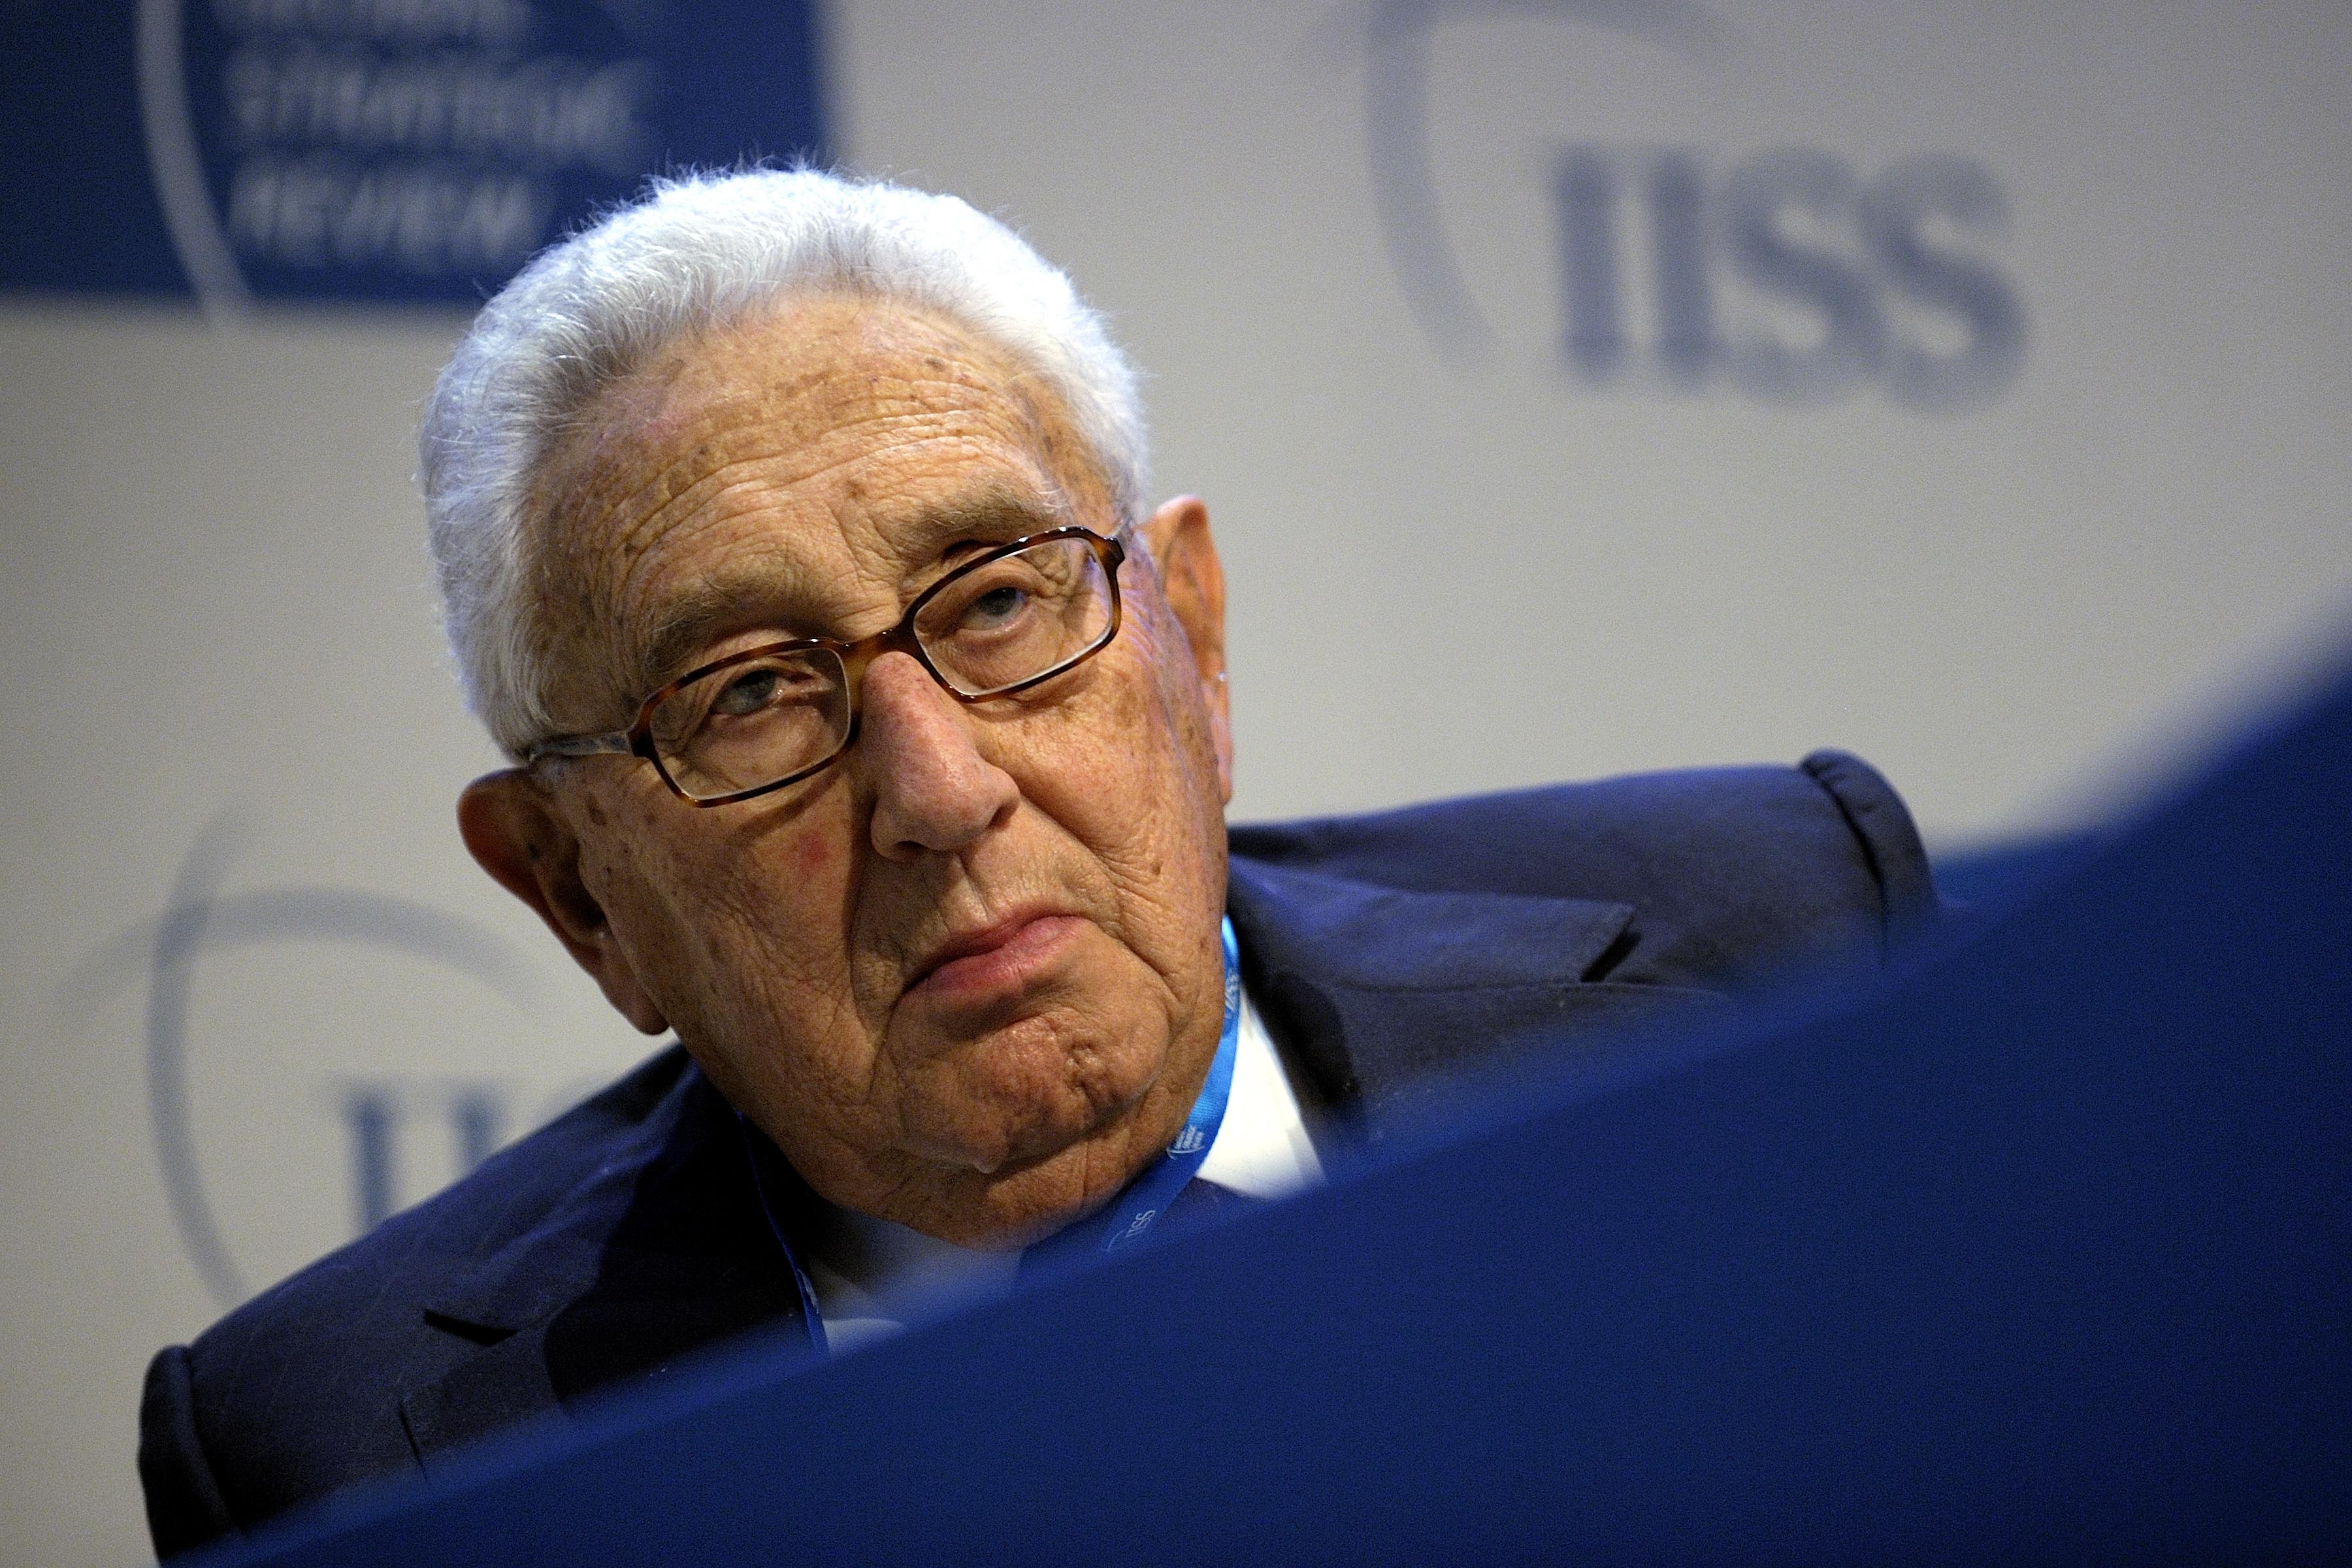 Former US Secretary of State, Henry Kissinger, looks on prior to a keynote speech on the theme of power shifts and security on the opening day of the Eighth Annual IISS Global Strategic Review conference on September 10, 2010 in Geneva.  AFP PHOTO / FABRICE COFFRINI (Photo by Fabrice COFFRINI / AFP) (Photo by FABRICE COFFRINI/AFP via Getty Images)